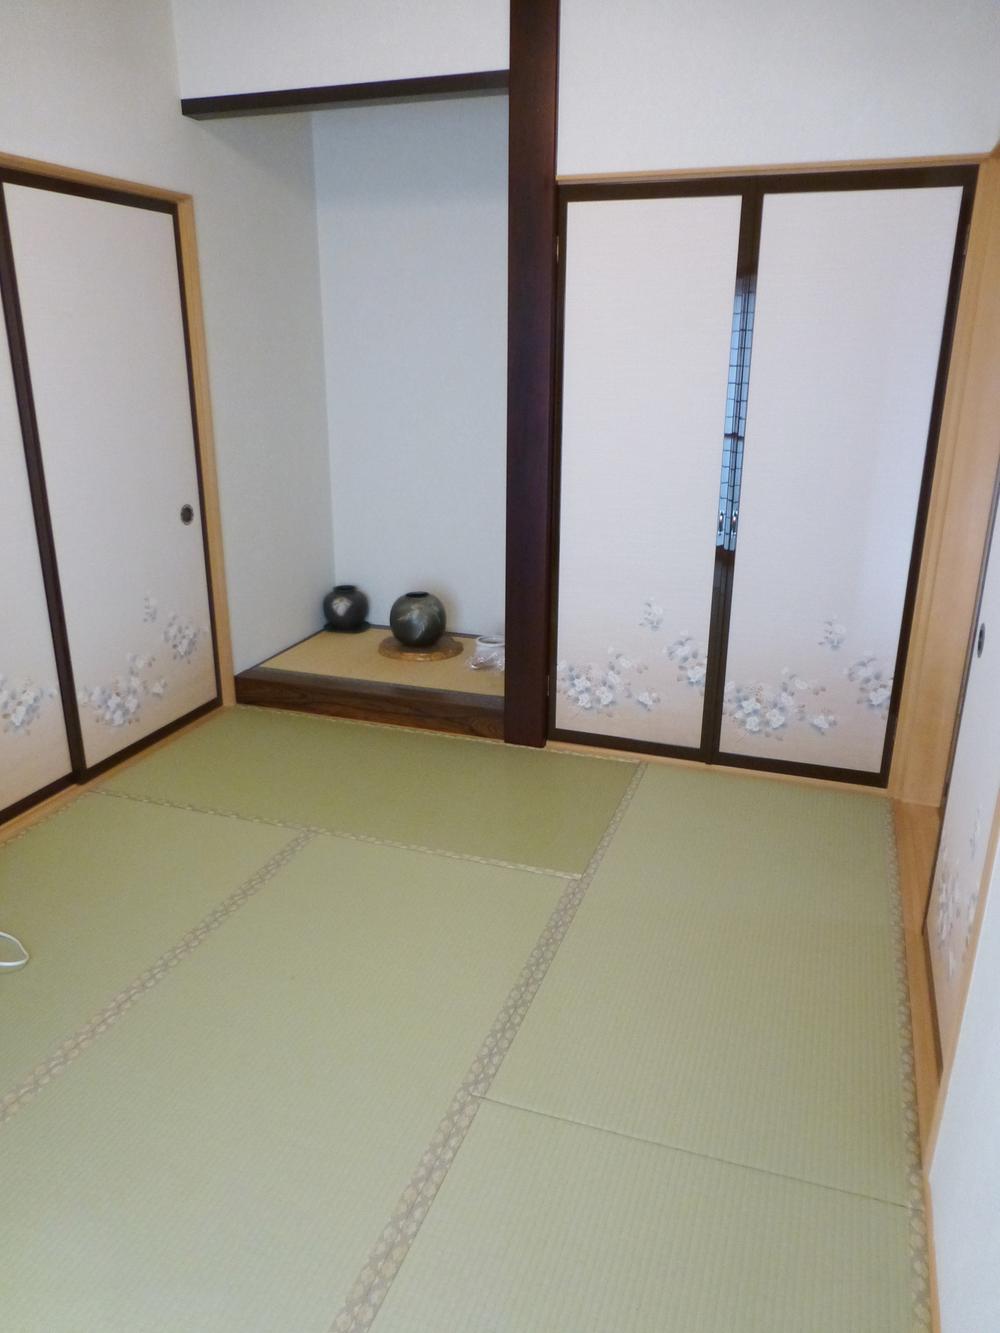 Non-living room. Japanese-style room of calm atmosphere you can use it as a place of your hospitality. 